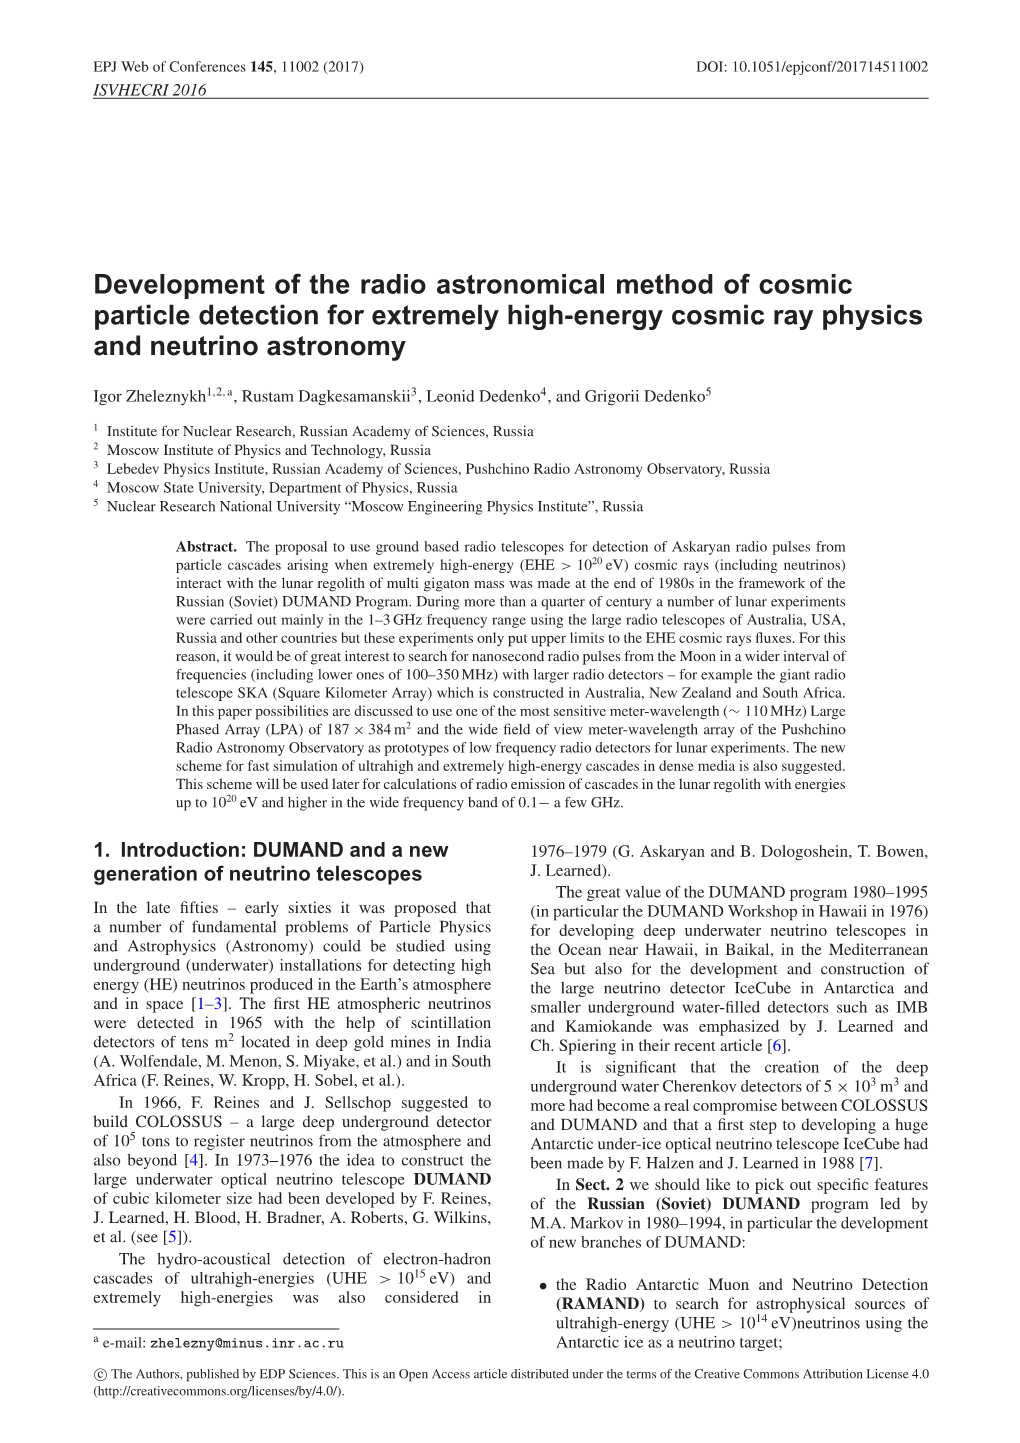 Development of the Radio Astronomical Method of Cosmic Particle Detection for Extremely High-Energy Cosmic Ray Physics and Neutrino Astronomy